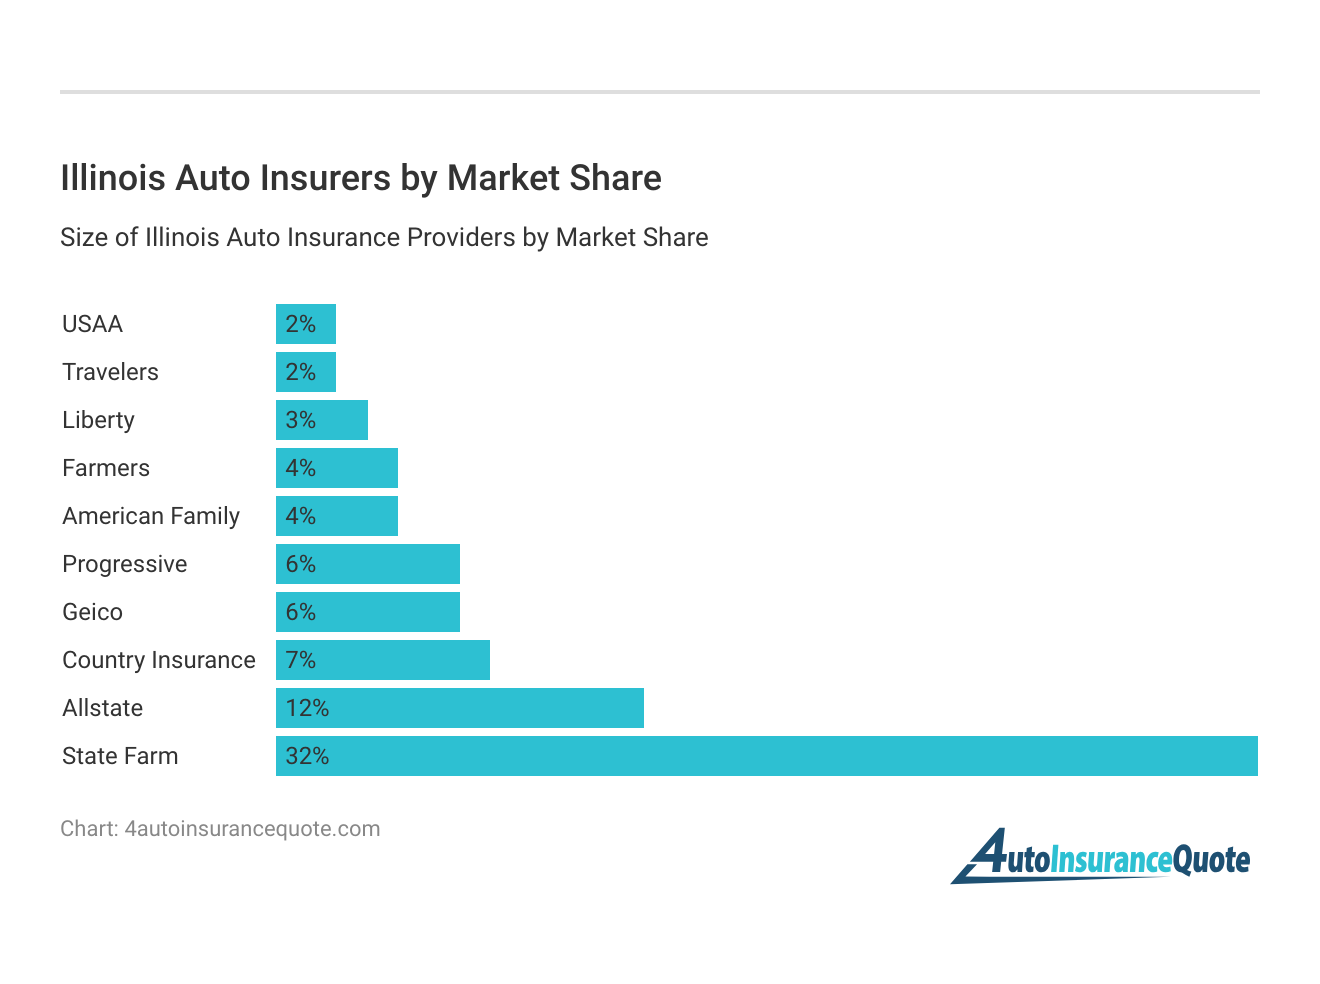 <h3>Illinois Auto Insurers by Market Share</h3>